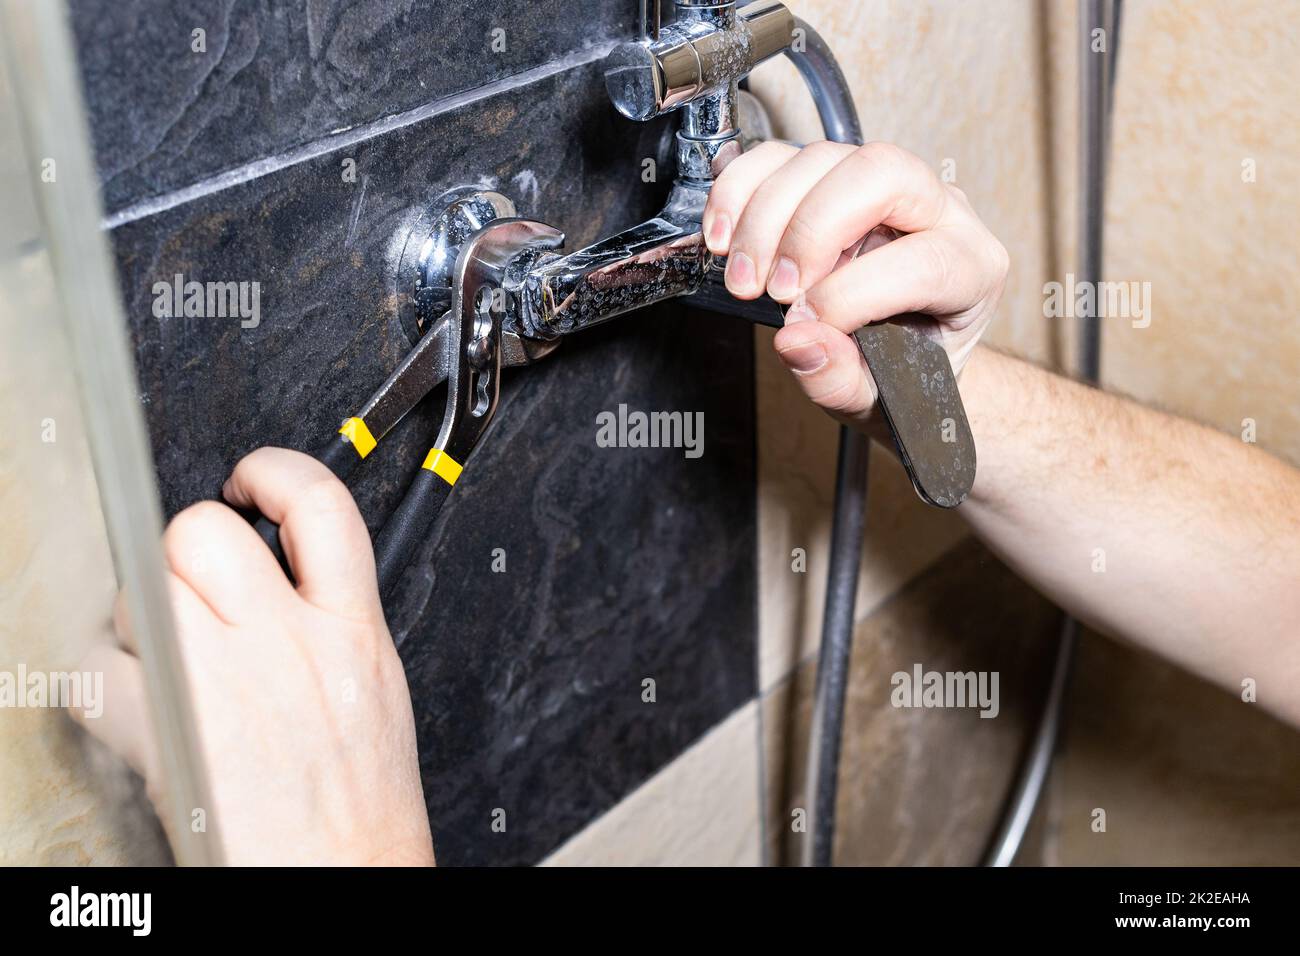 plumber installs shower faucet on tiled wall Stock Photo